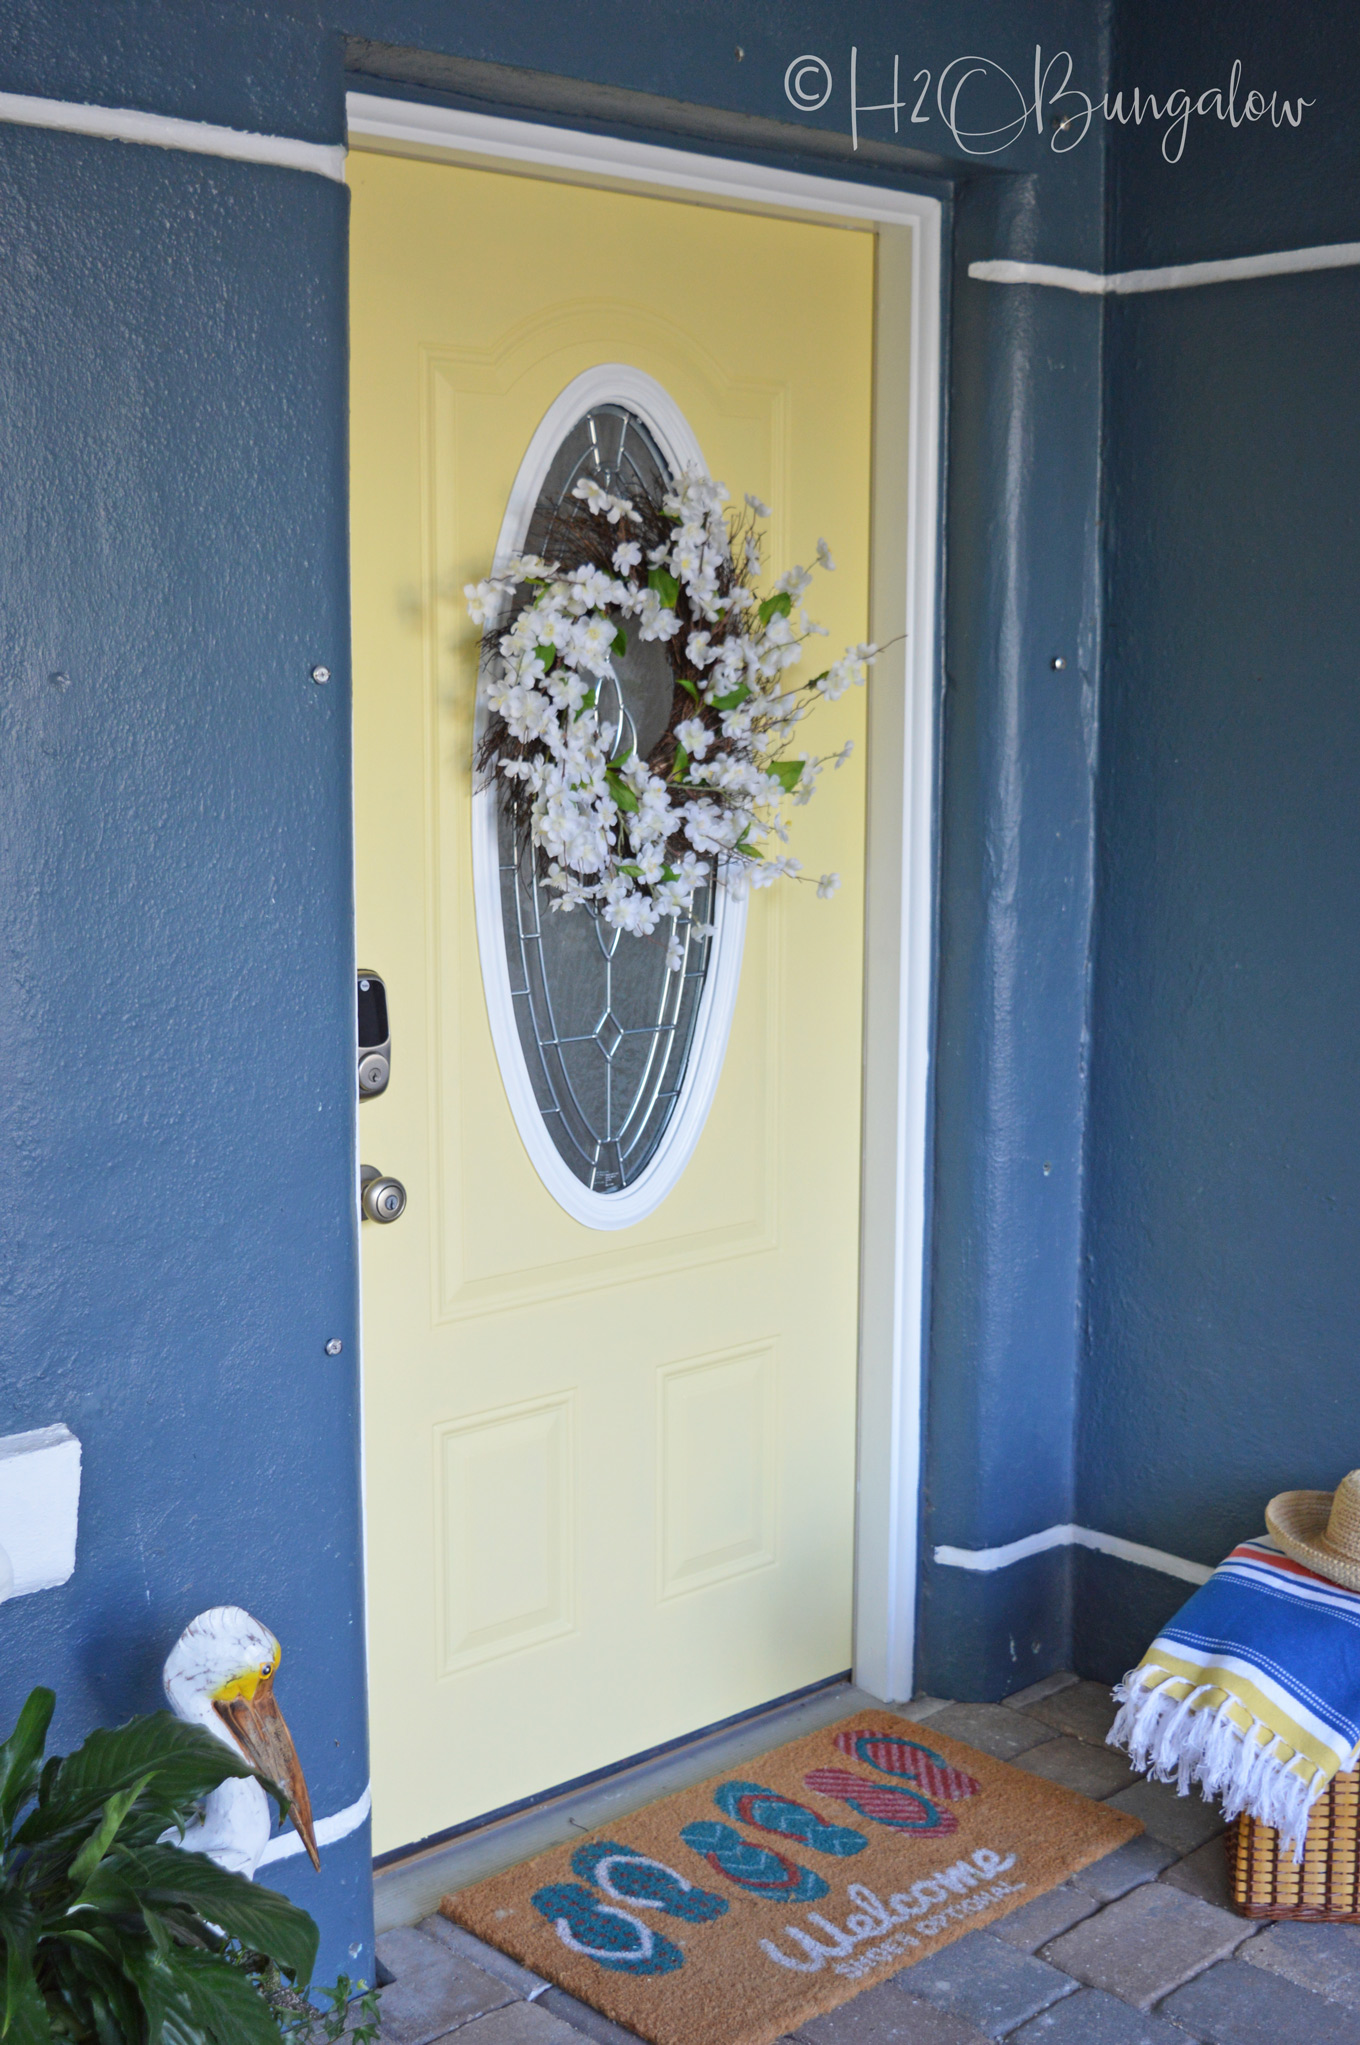 I can't believe I finally bit the bullet and changed out the entry to a yellow painted front door, Guys!  Thinking about painting your front door yellow or maybe even another color? See my tutorial on how to paint a front door, pick out a color and links to my most popular home improvement painting tutorials